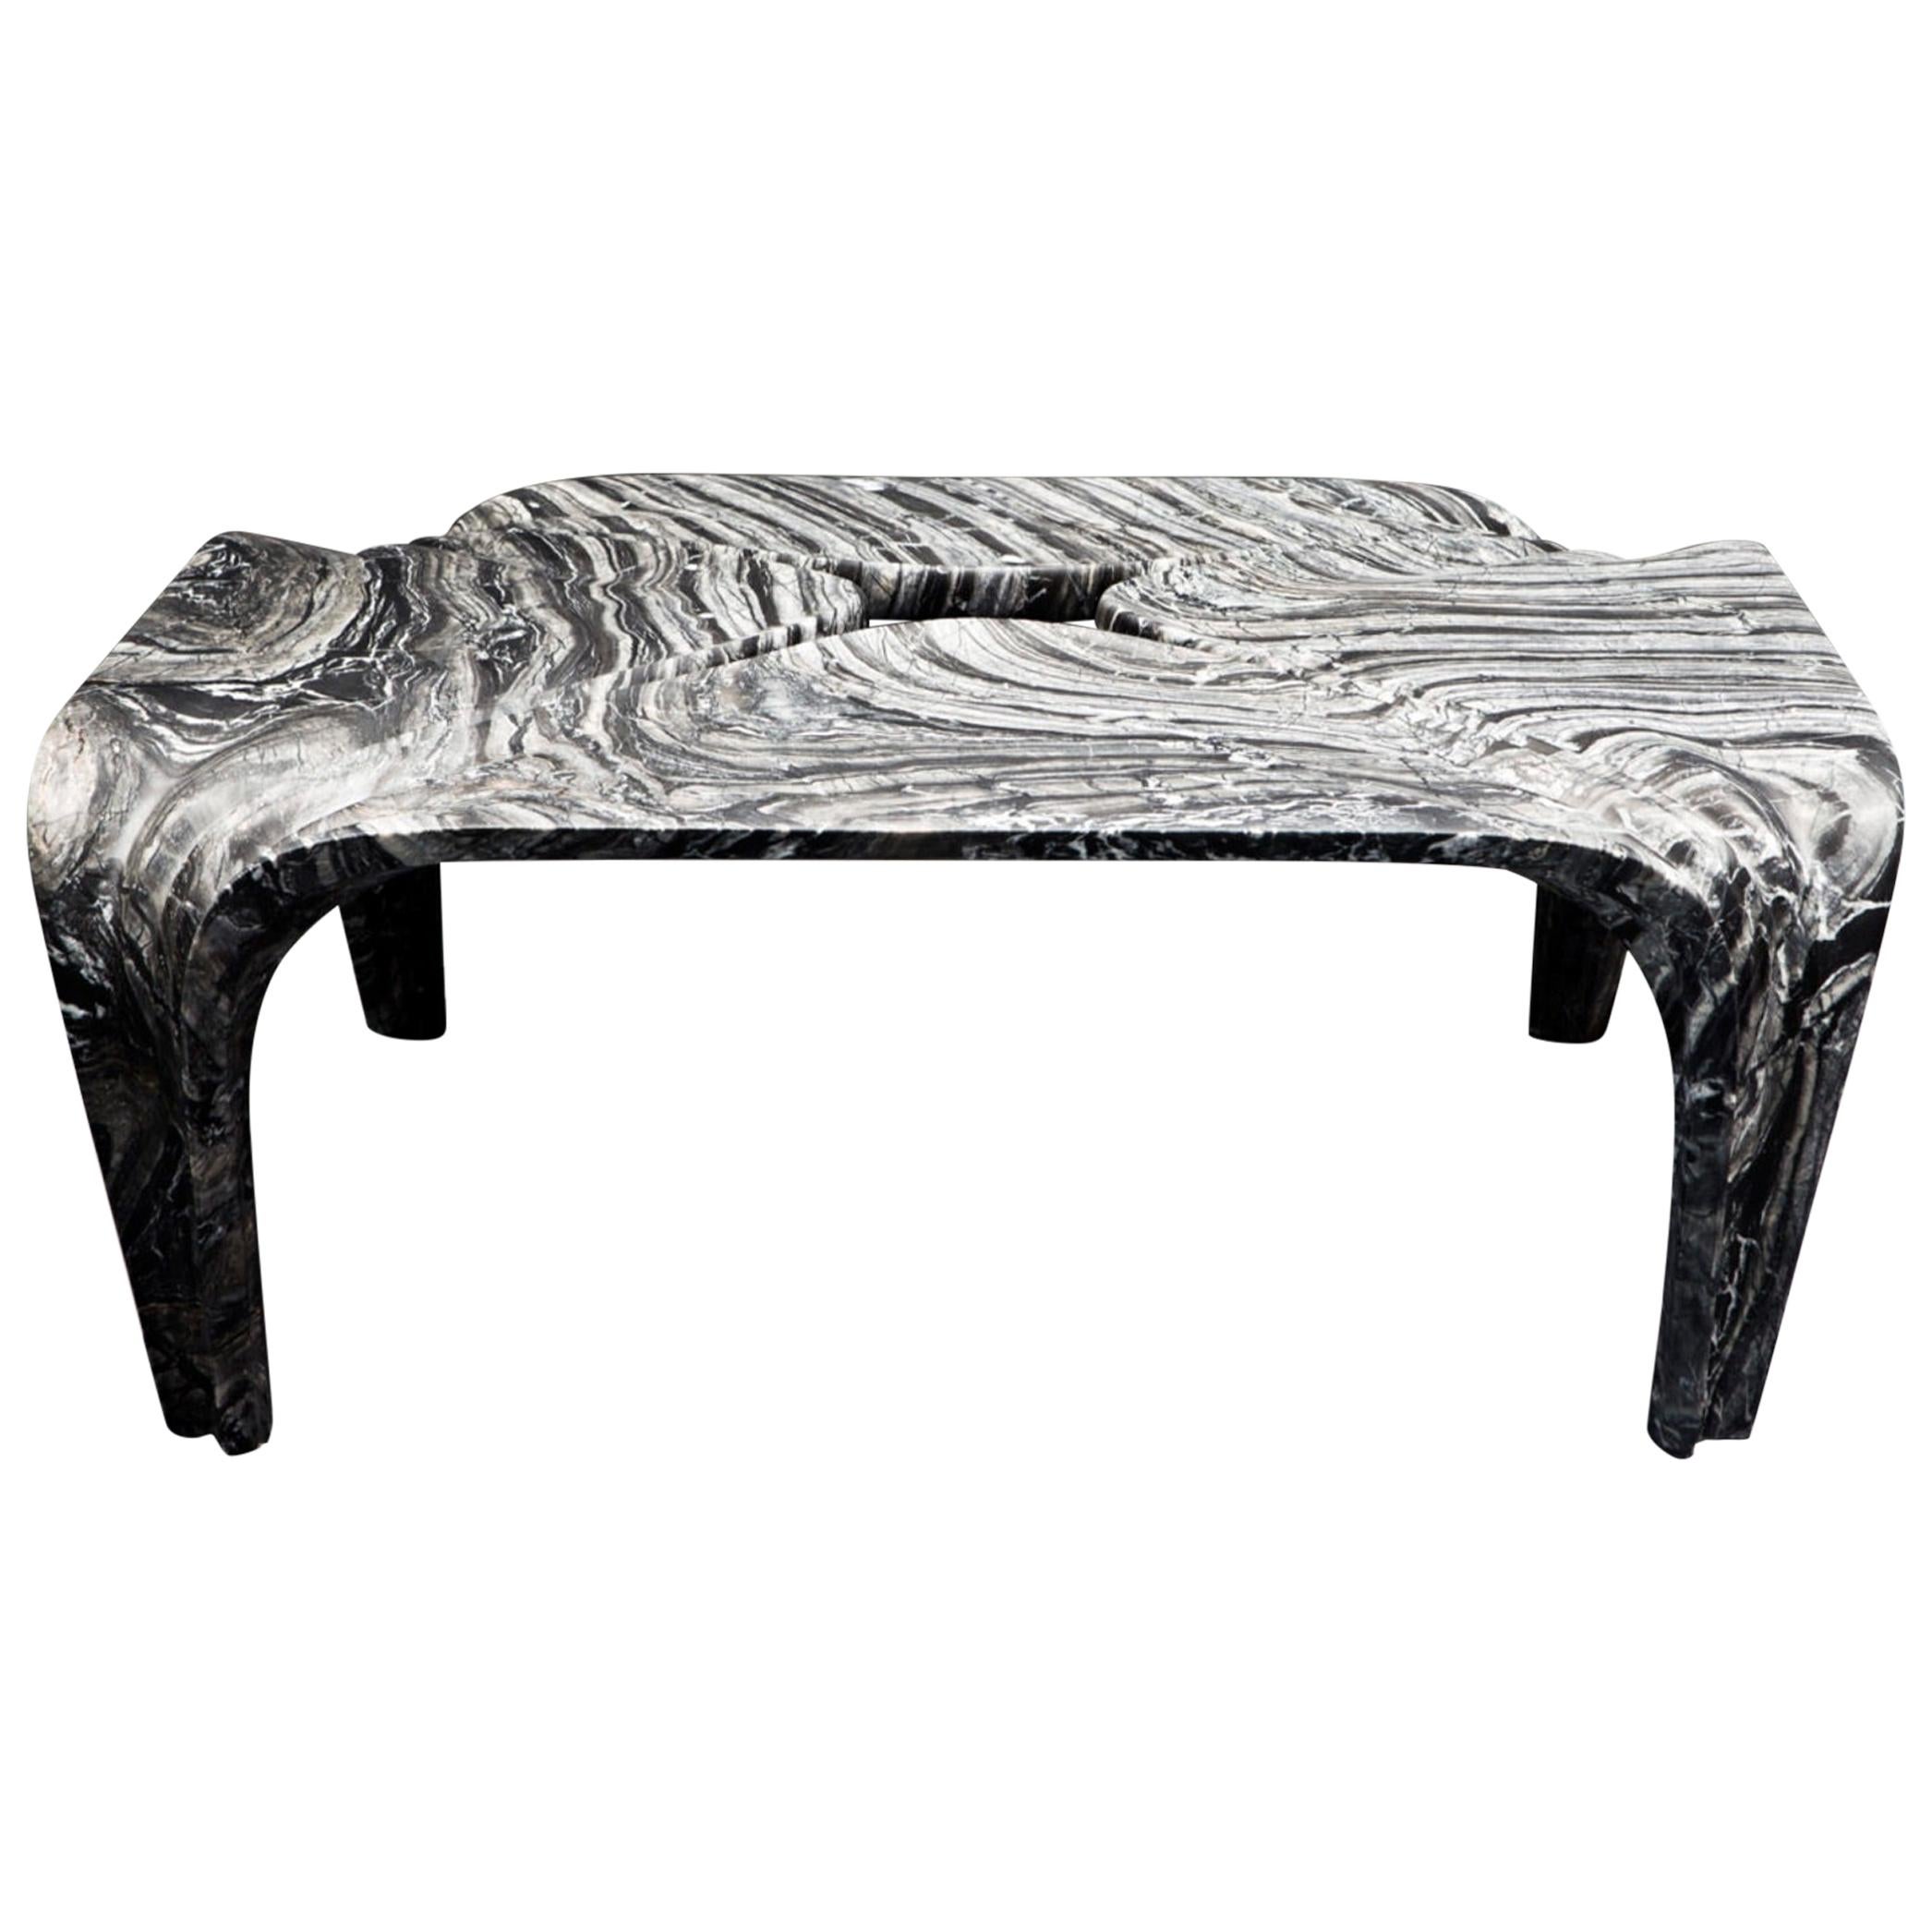 This Italian marble table is formed from triangular quadrants of marble that join at the corners and curve down to form the legs. The inside corners have a rounded finish, creating gaps in the center of each tabletop. The surface of the marble is